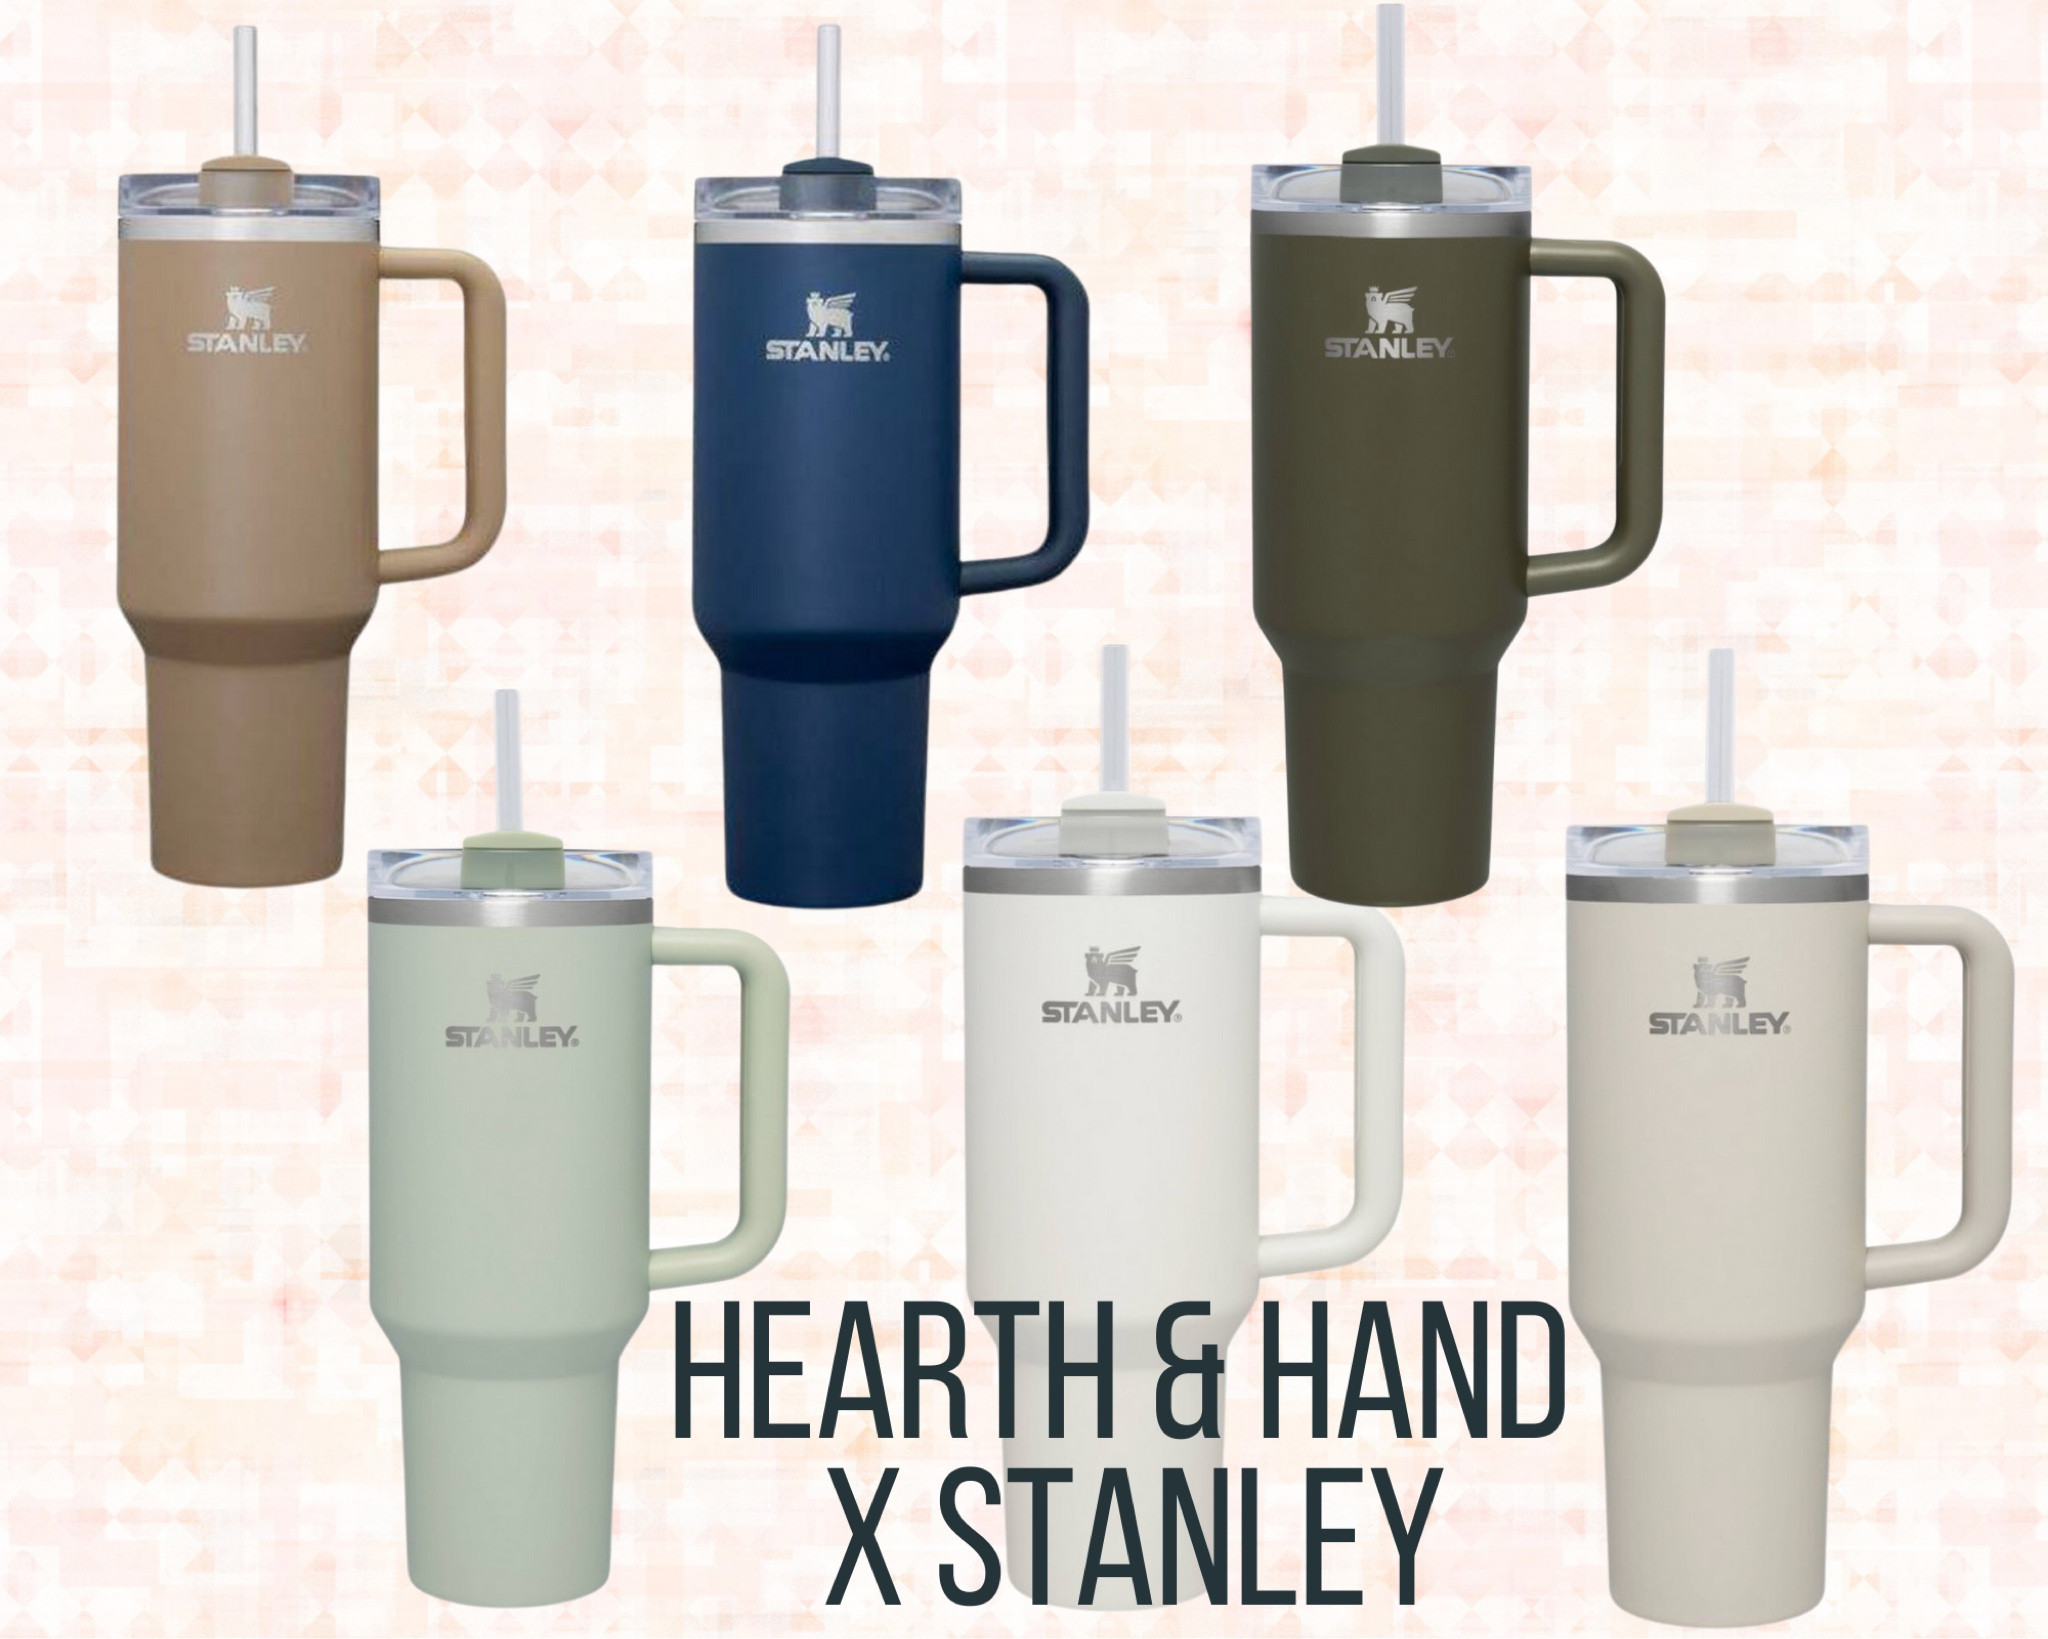 NEW Stanley x Hearth & Hand tumblers now available at @target ! I am i